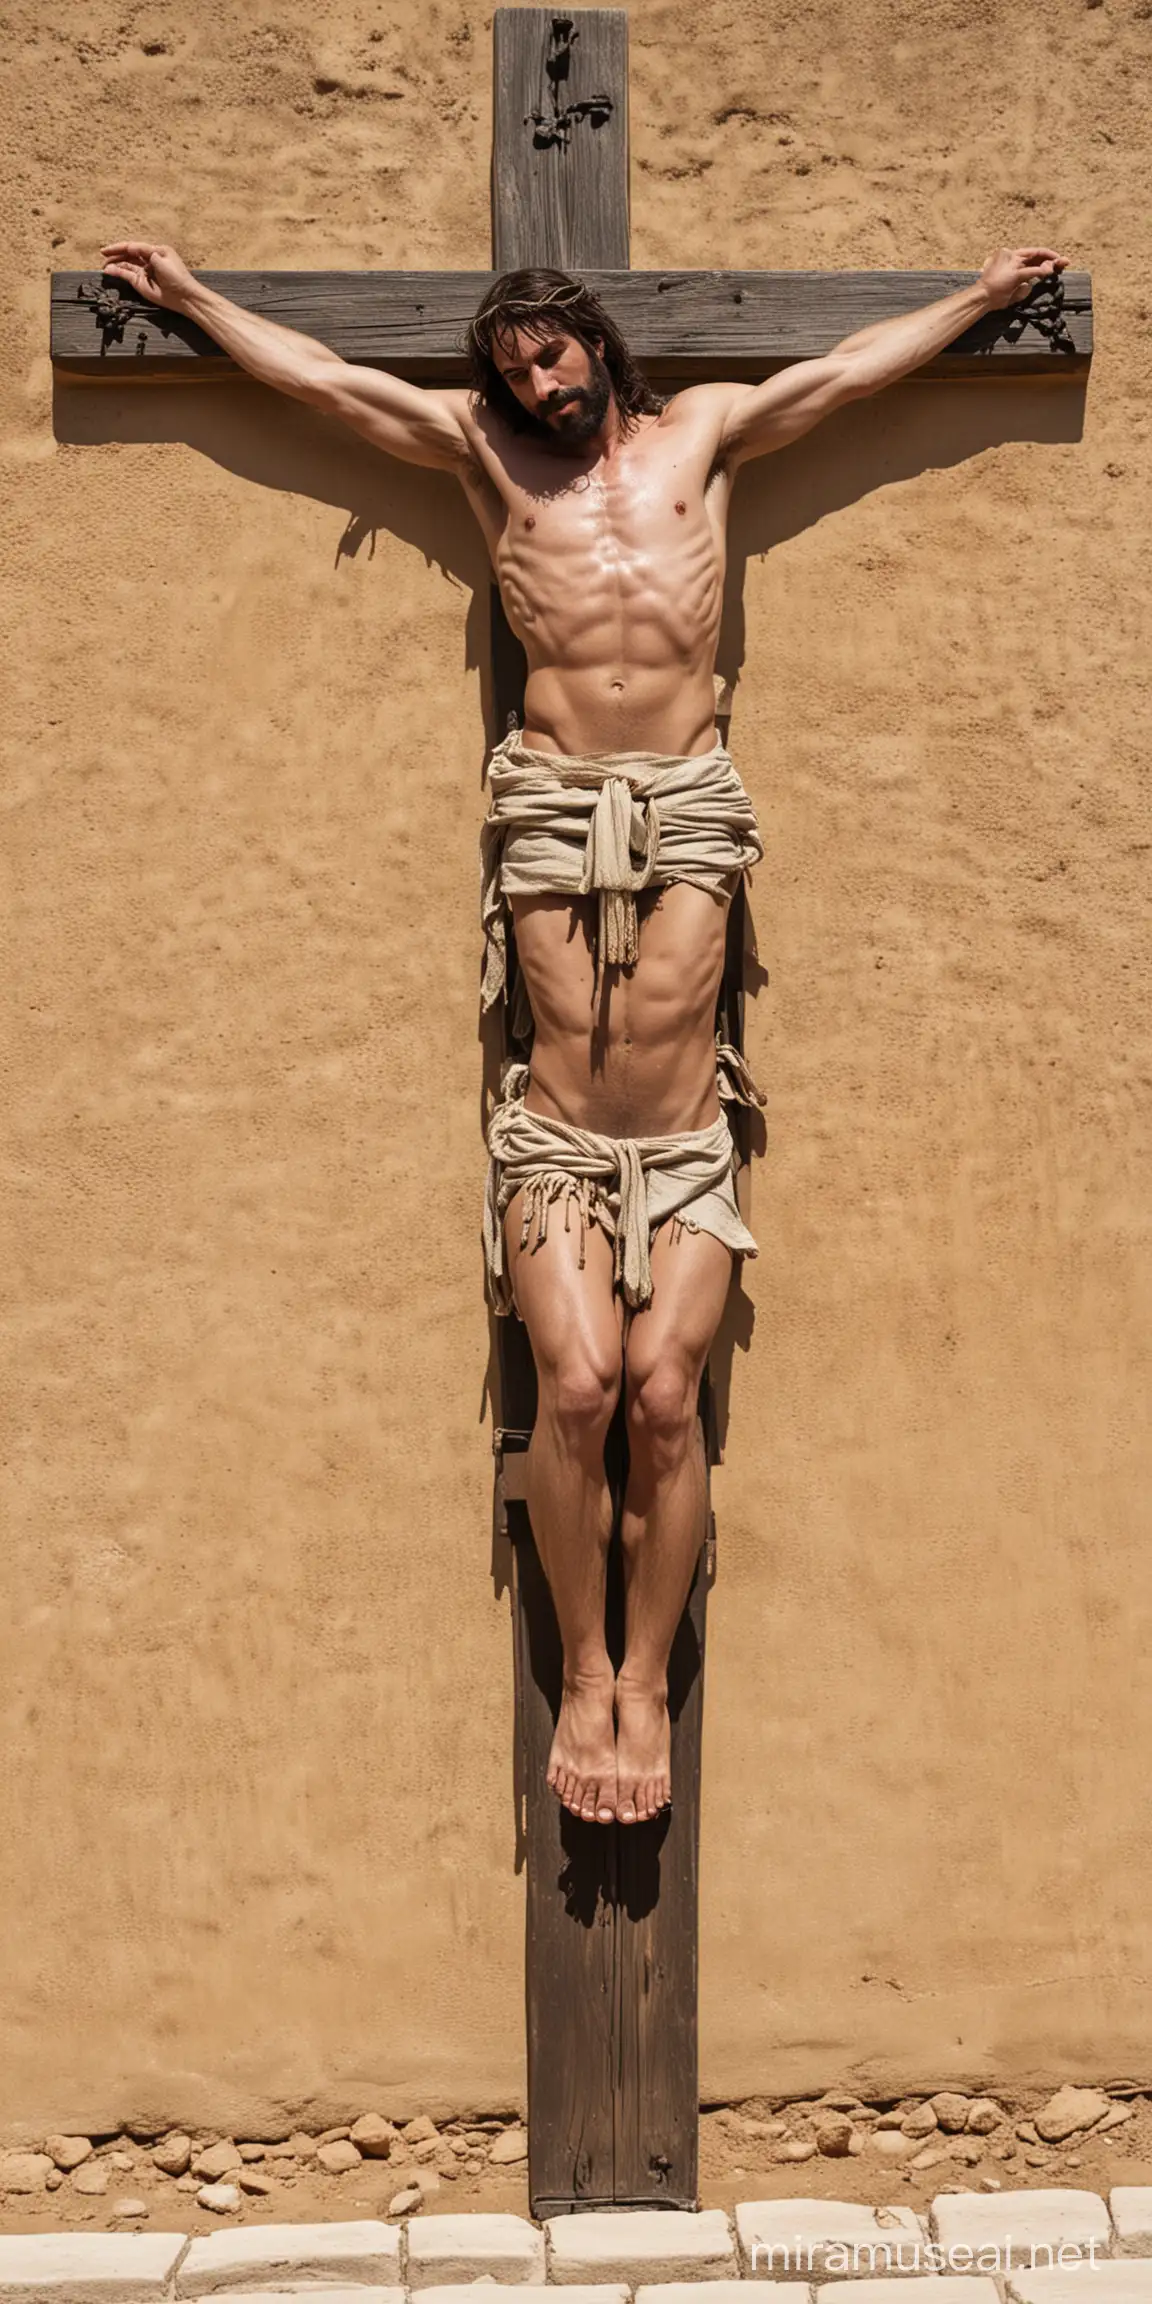 Passionplay with 3 crosses, jesus crucified in the middle and 2 thieves on the left en right crosses, it is 40 degrees celcius, the crosses, the bodies are sweaty due to the warm weather, the men are shirtless and are wearing loinclothes, they are nailed to the crosses, the crosses are shown completely on the picrues